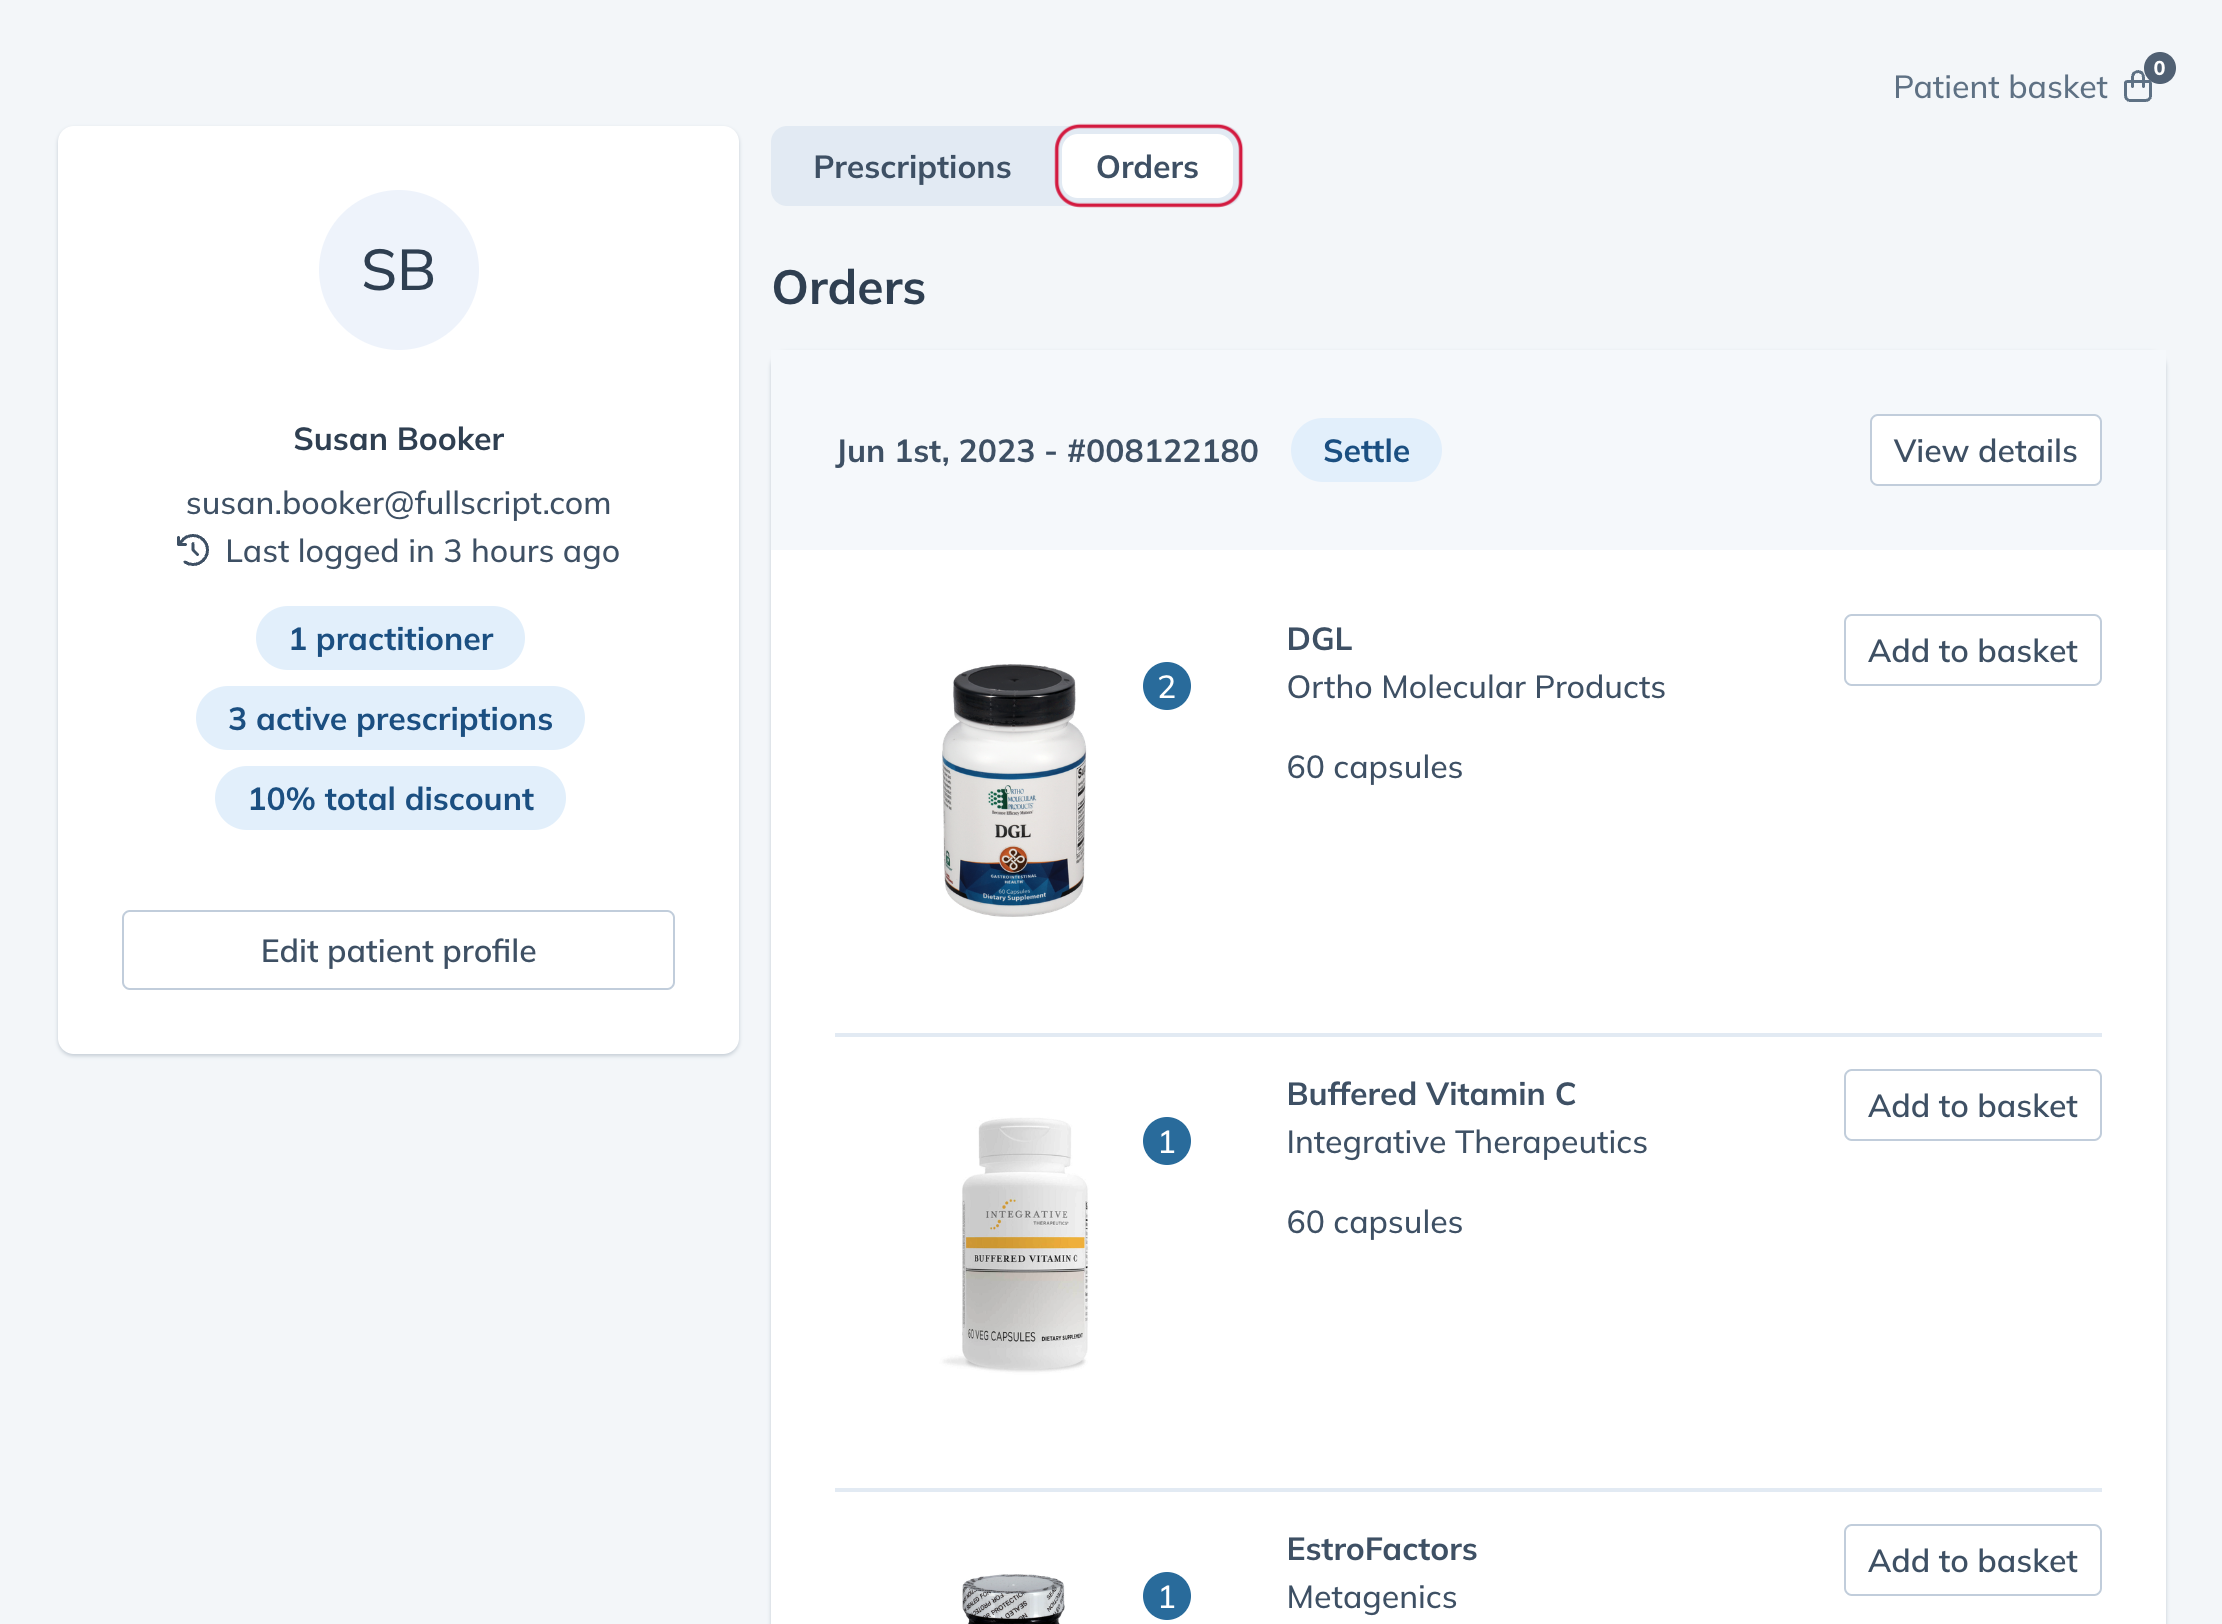 Click orders to view patient order history